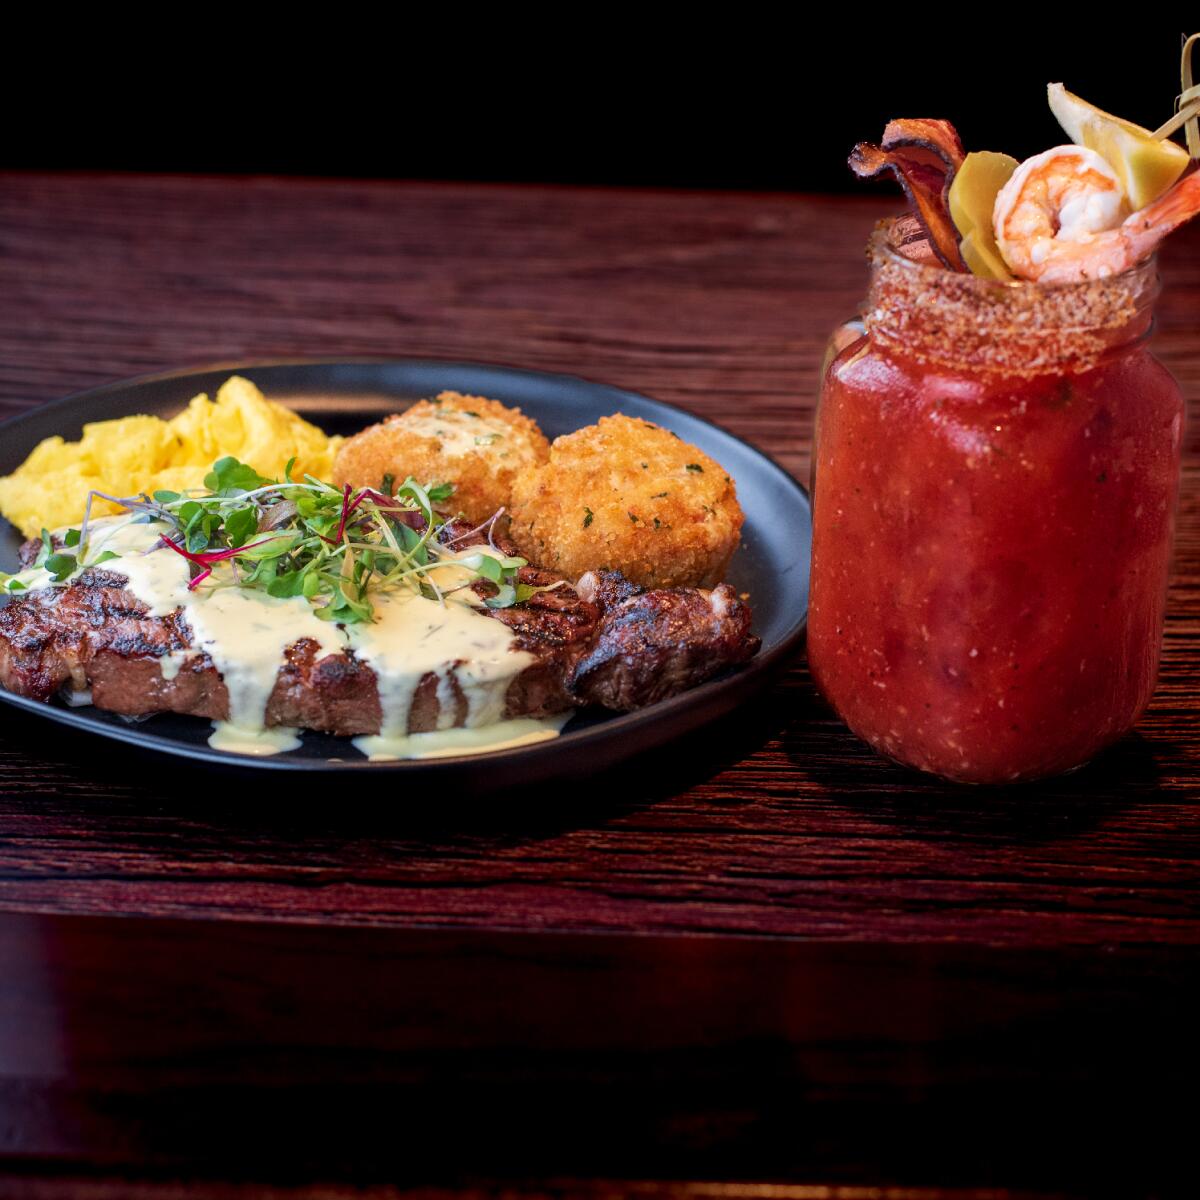 A rib-eye steak with scrambled eggs, a lobster fritter and a bloody mary on the side from Black Angus.